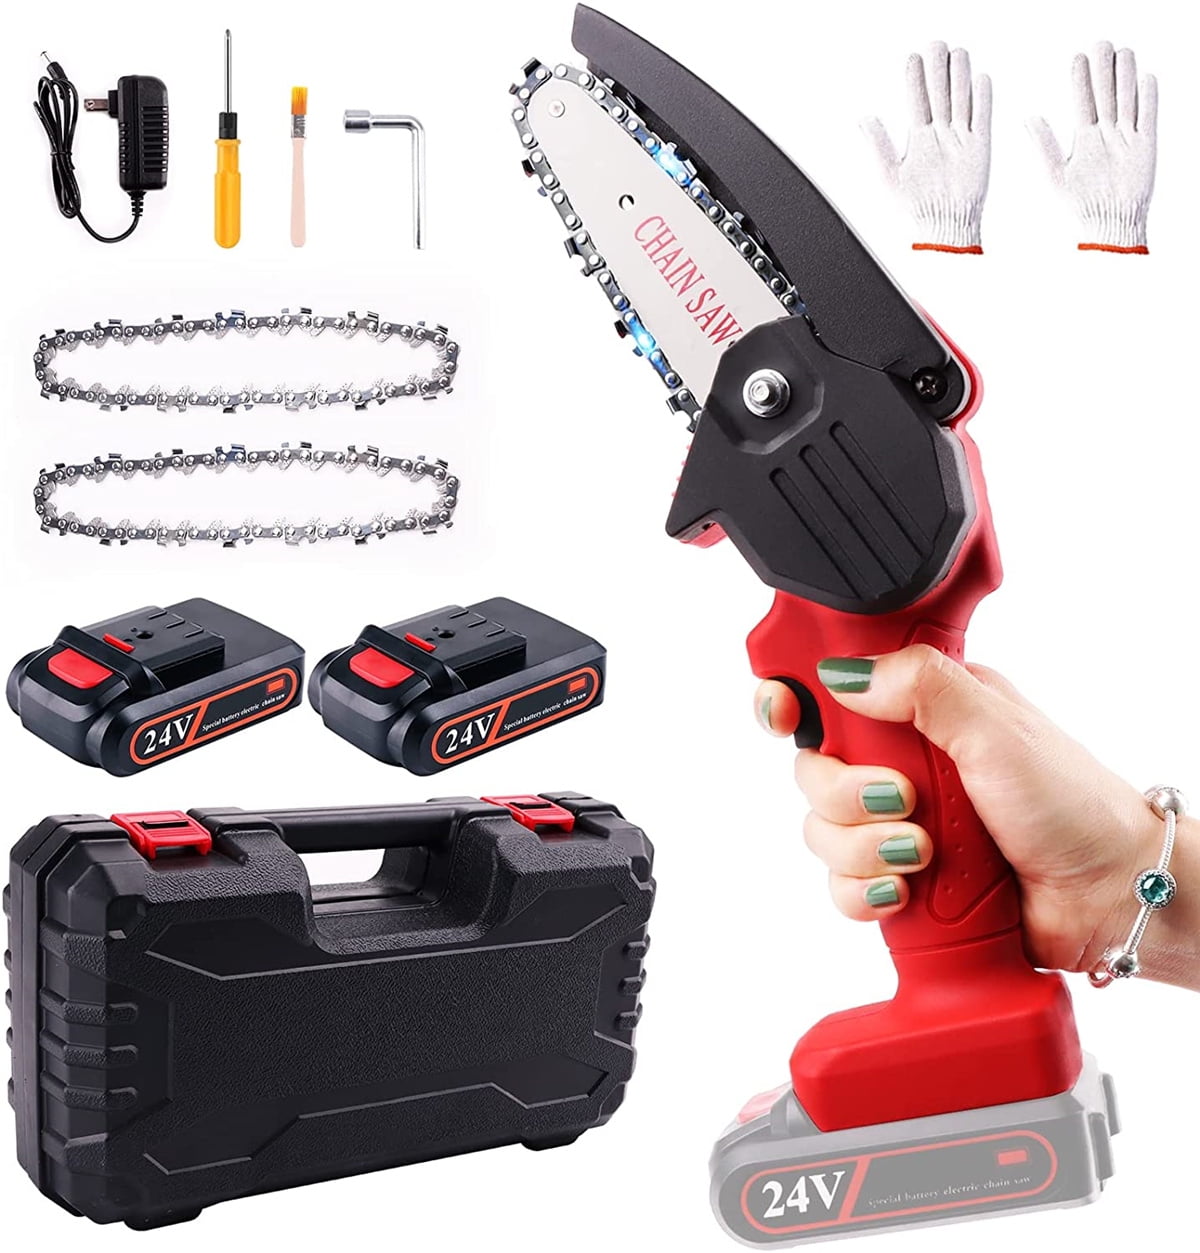 2 Batteries 2 Chains FOONSEN Mini Chainsaw battery powered Chainsaw for Wood Cutting 4“ Hand held Cordless Chain saw Tree Branches Shears Pruning